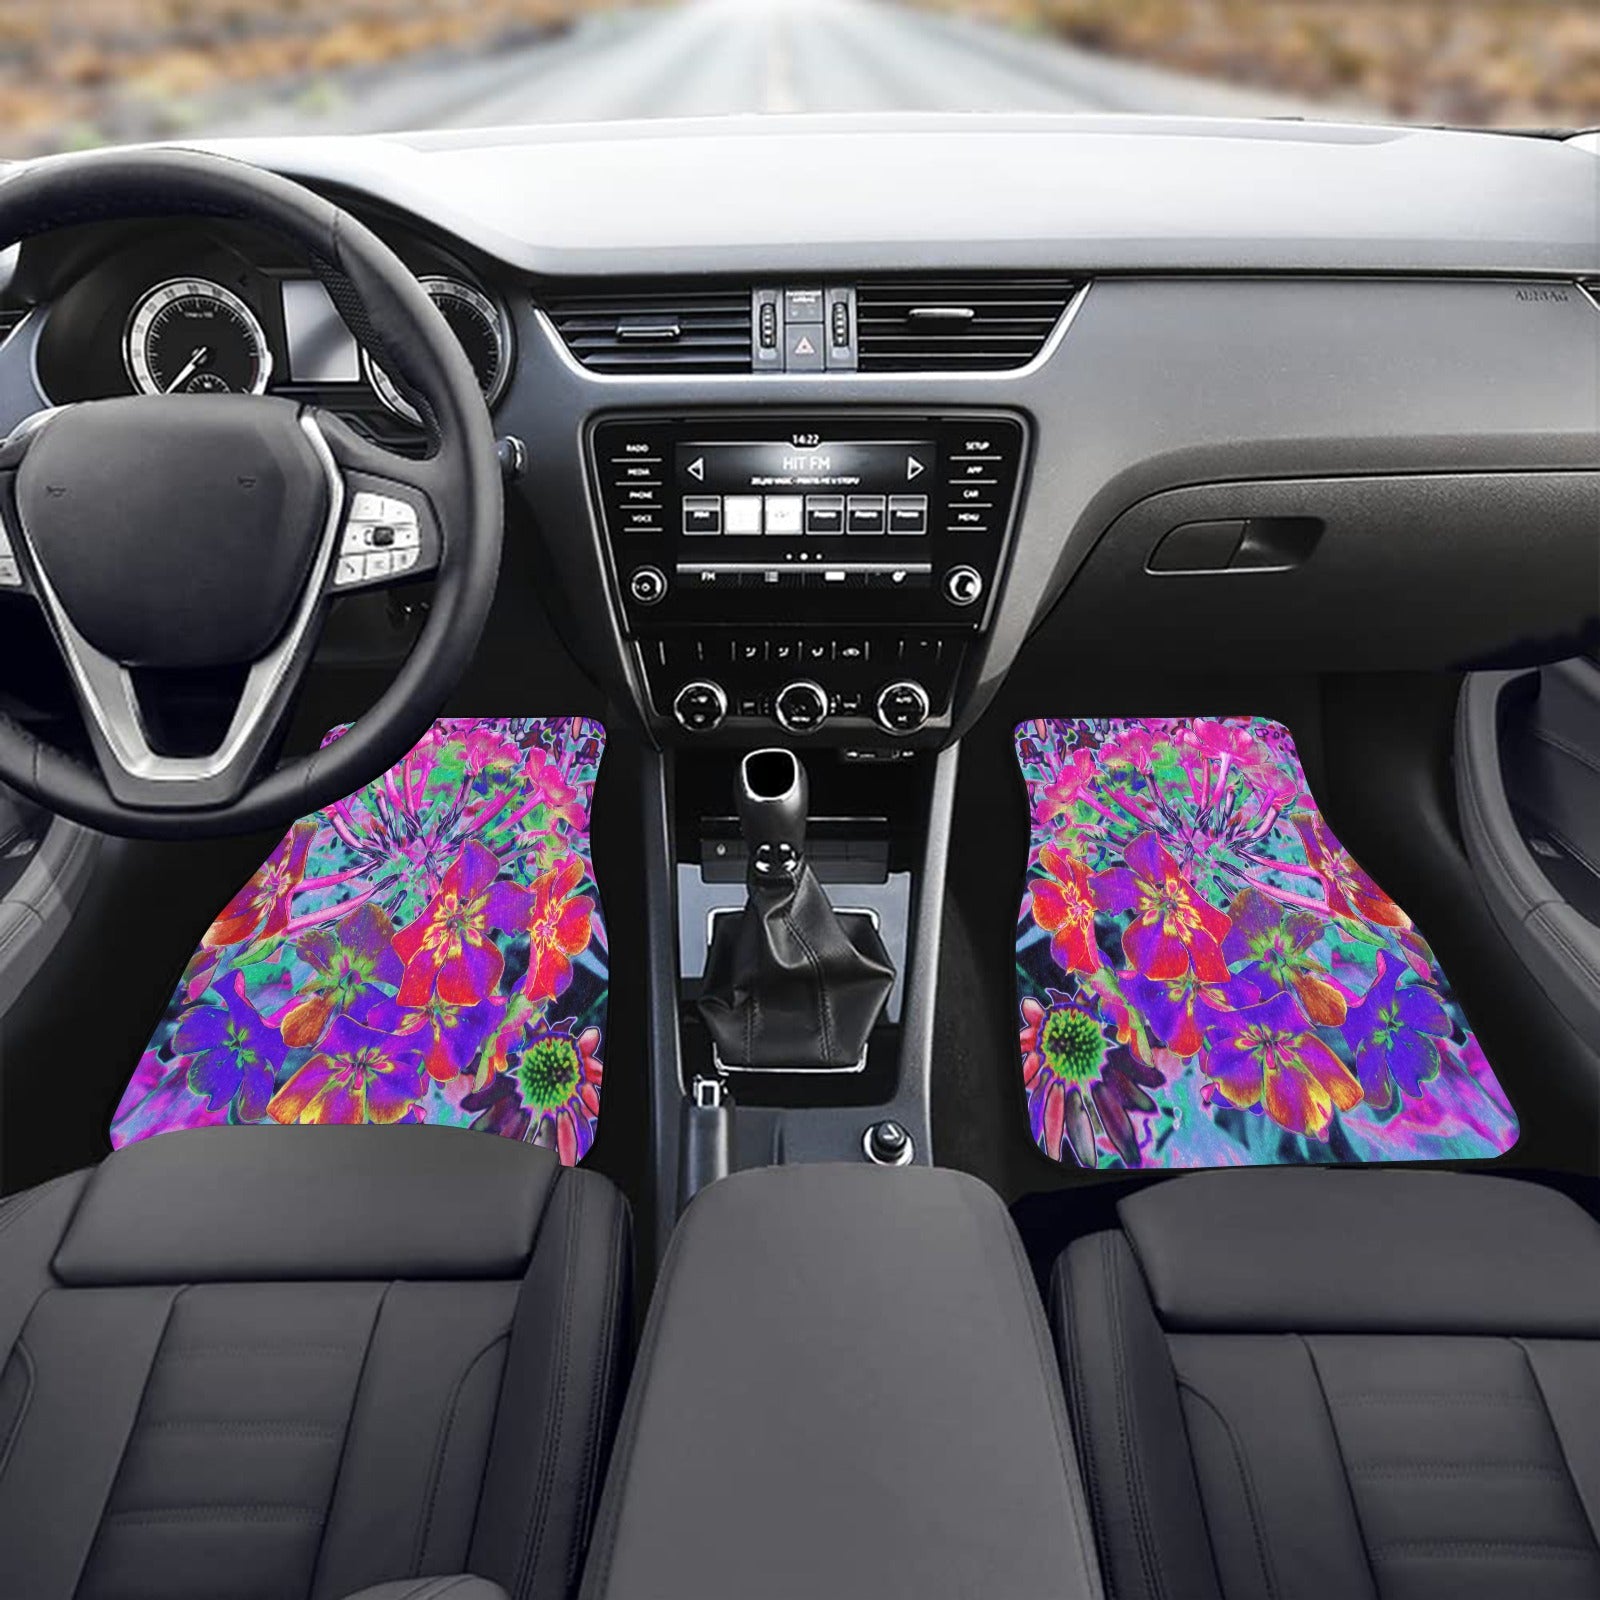 Car Floor Mats - Dramatic Psychedelic Colorful Red and Purple Flowers - Front Set of 2